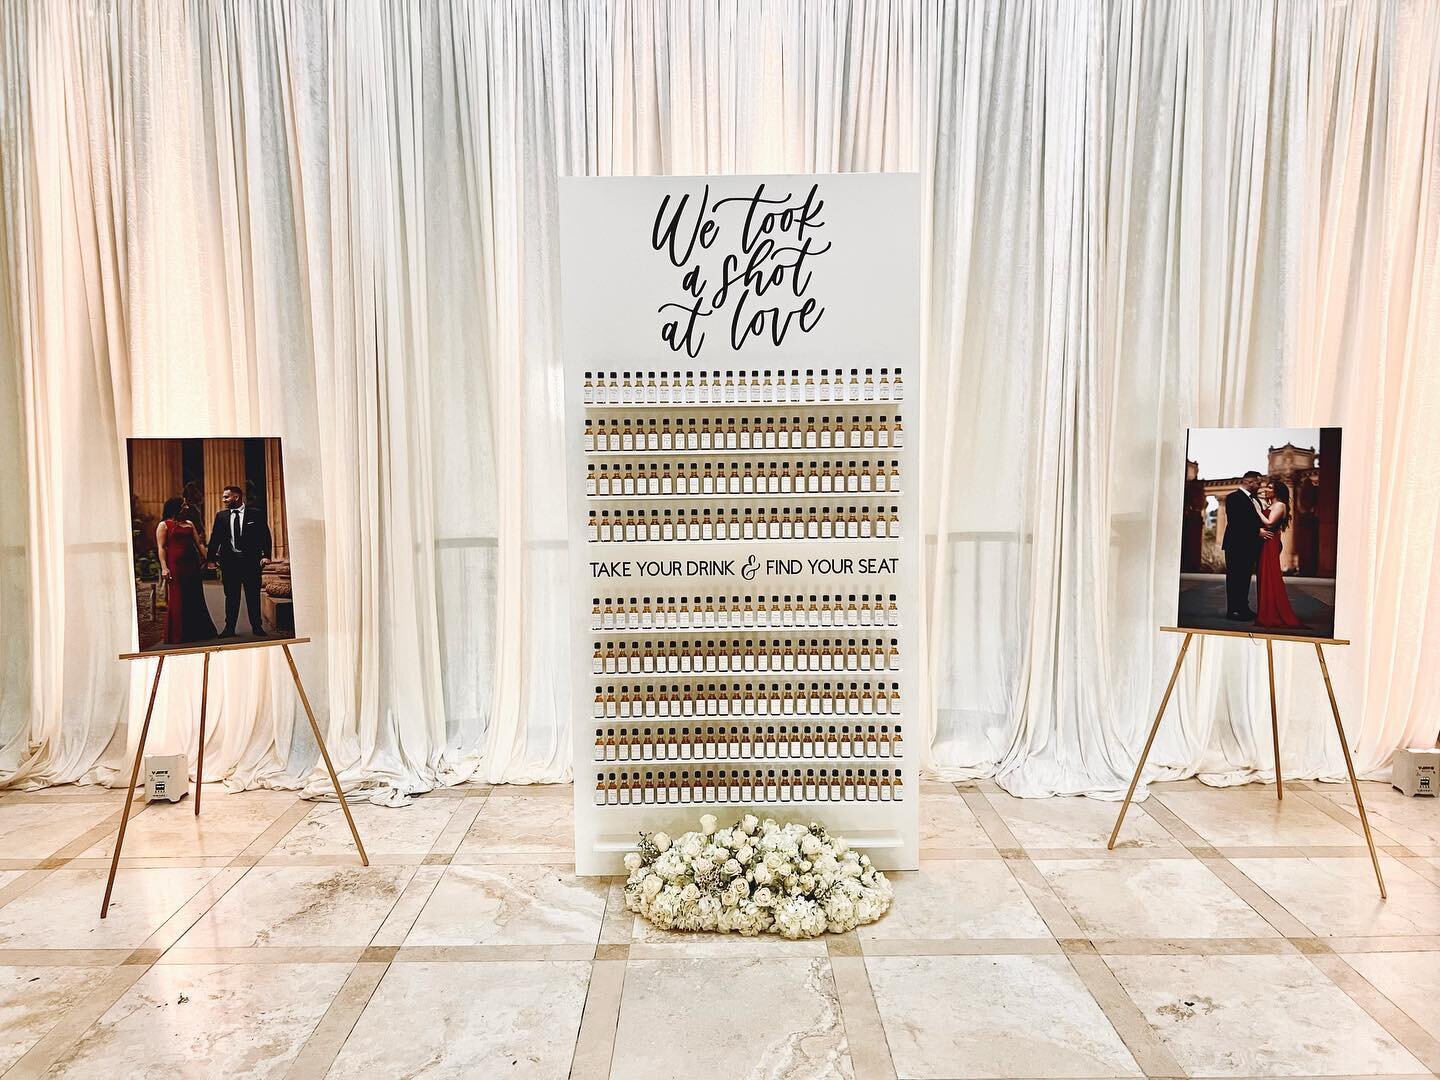 Say hello to our newest 2023 rental: an escort wall for over 200 guests. 🥃 Every detail here is handmade with utmost care, from the 8&rsquo; wall to the calligraphy on each bottle.